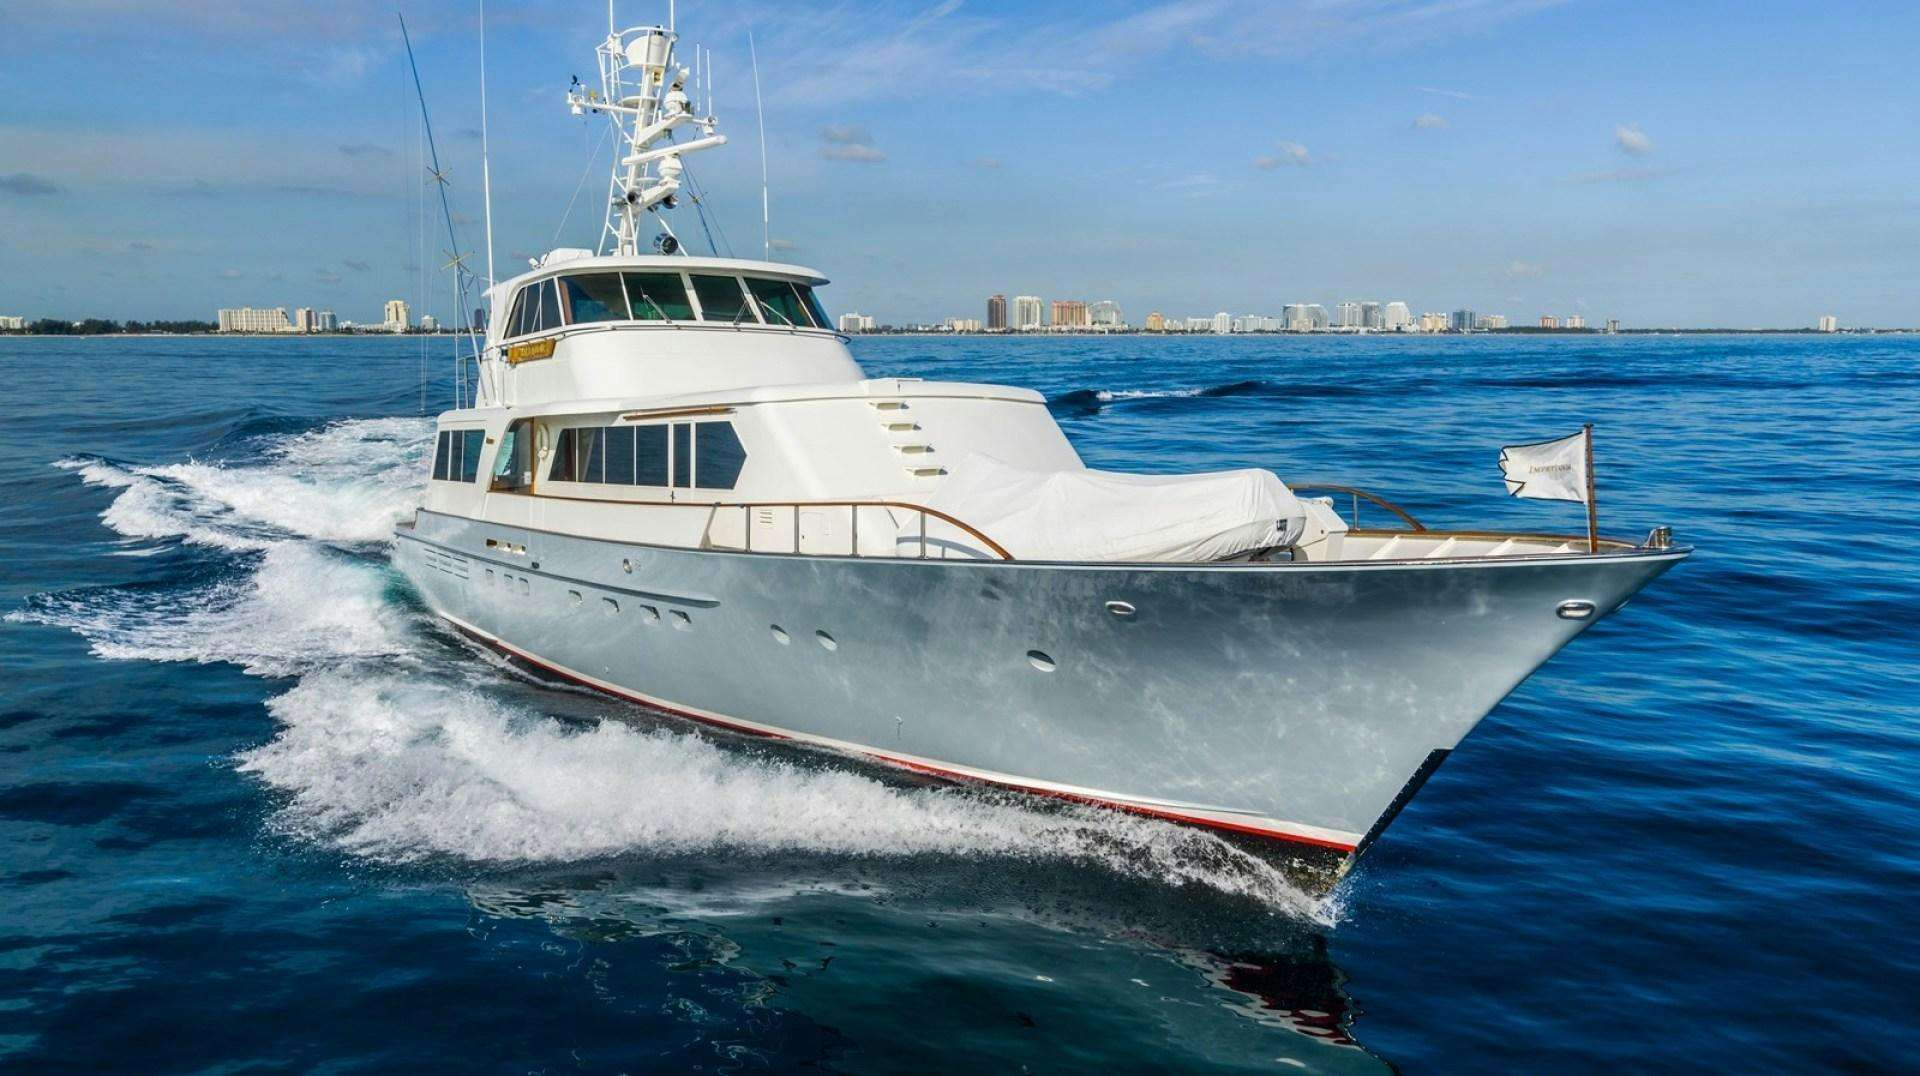 Impetuous
Yacht for Sale